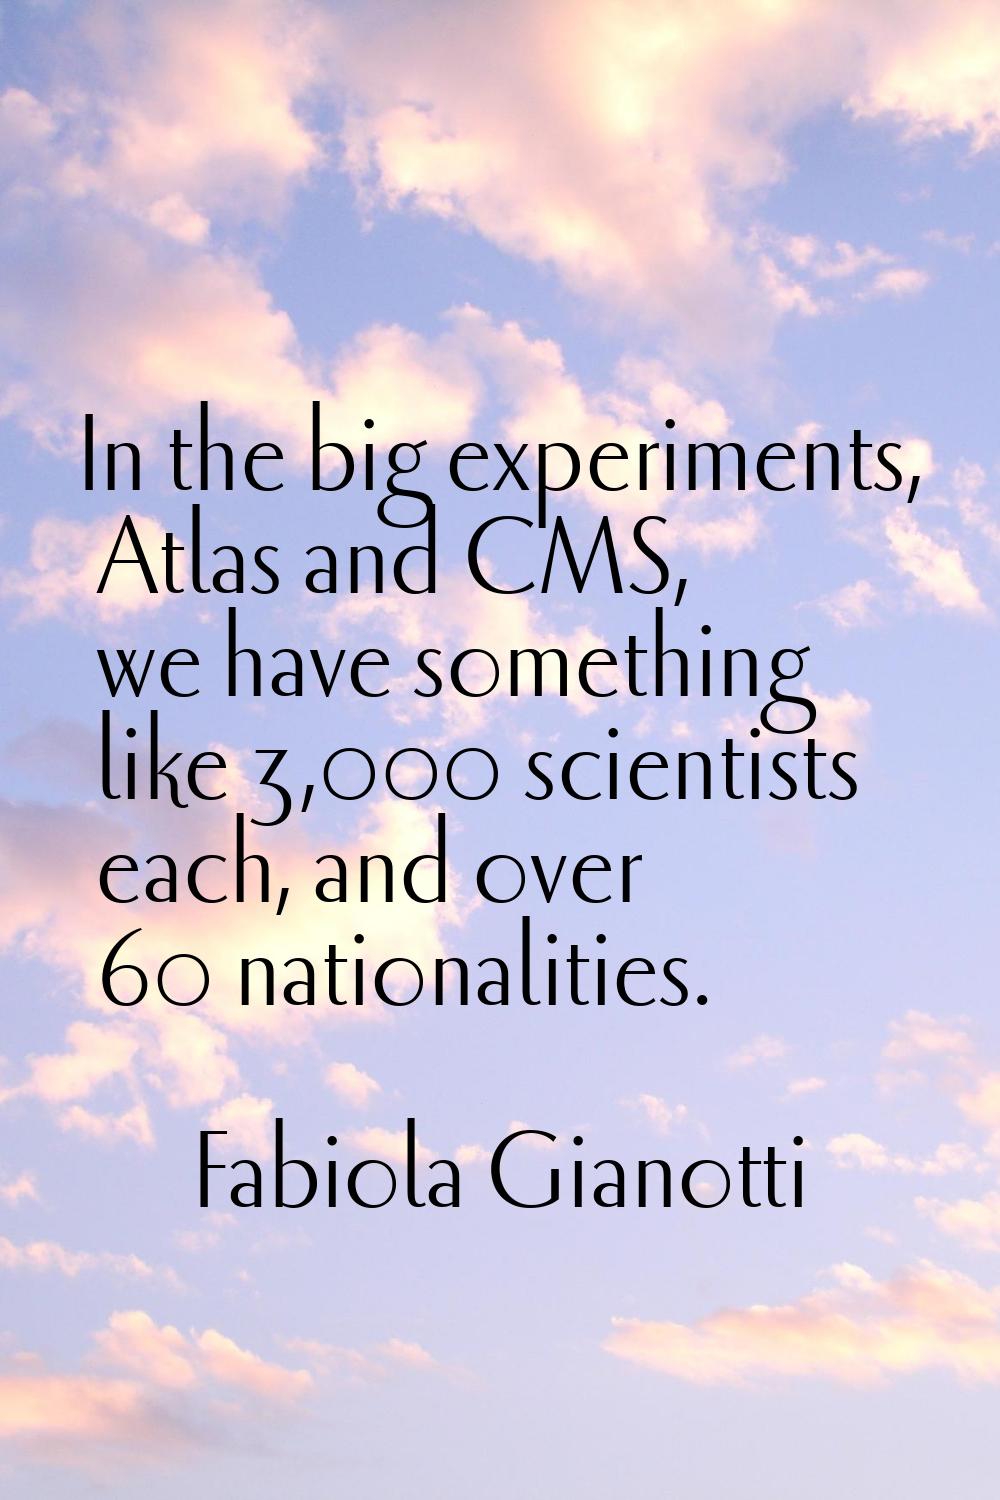 In the big experiments, Atlas and CMS, we have something like 3,000 scientists each, and over 60 na